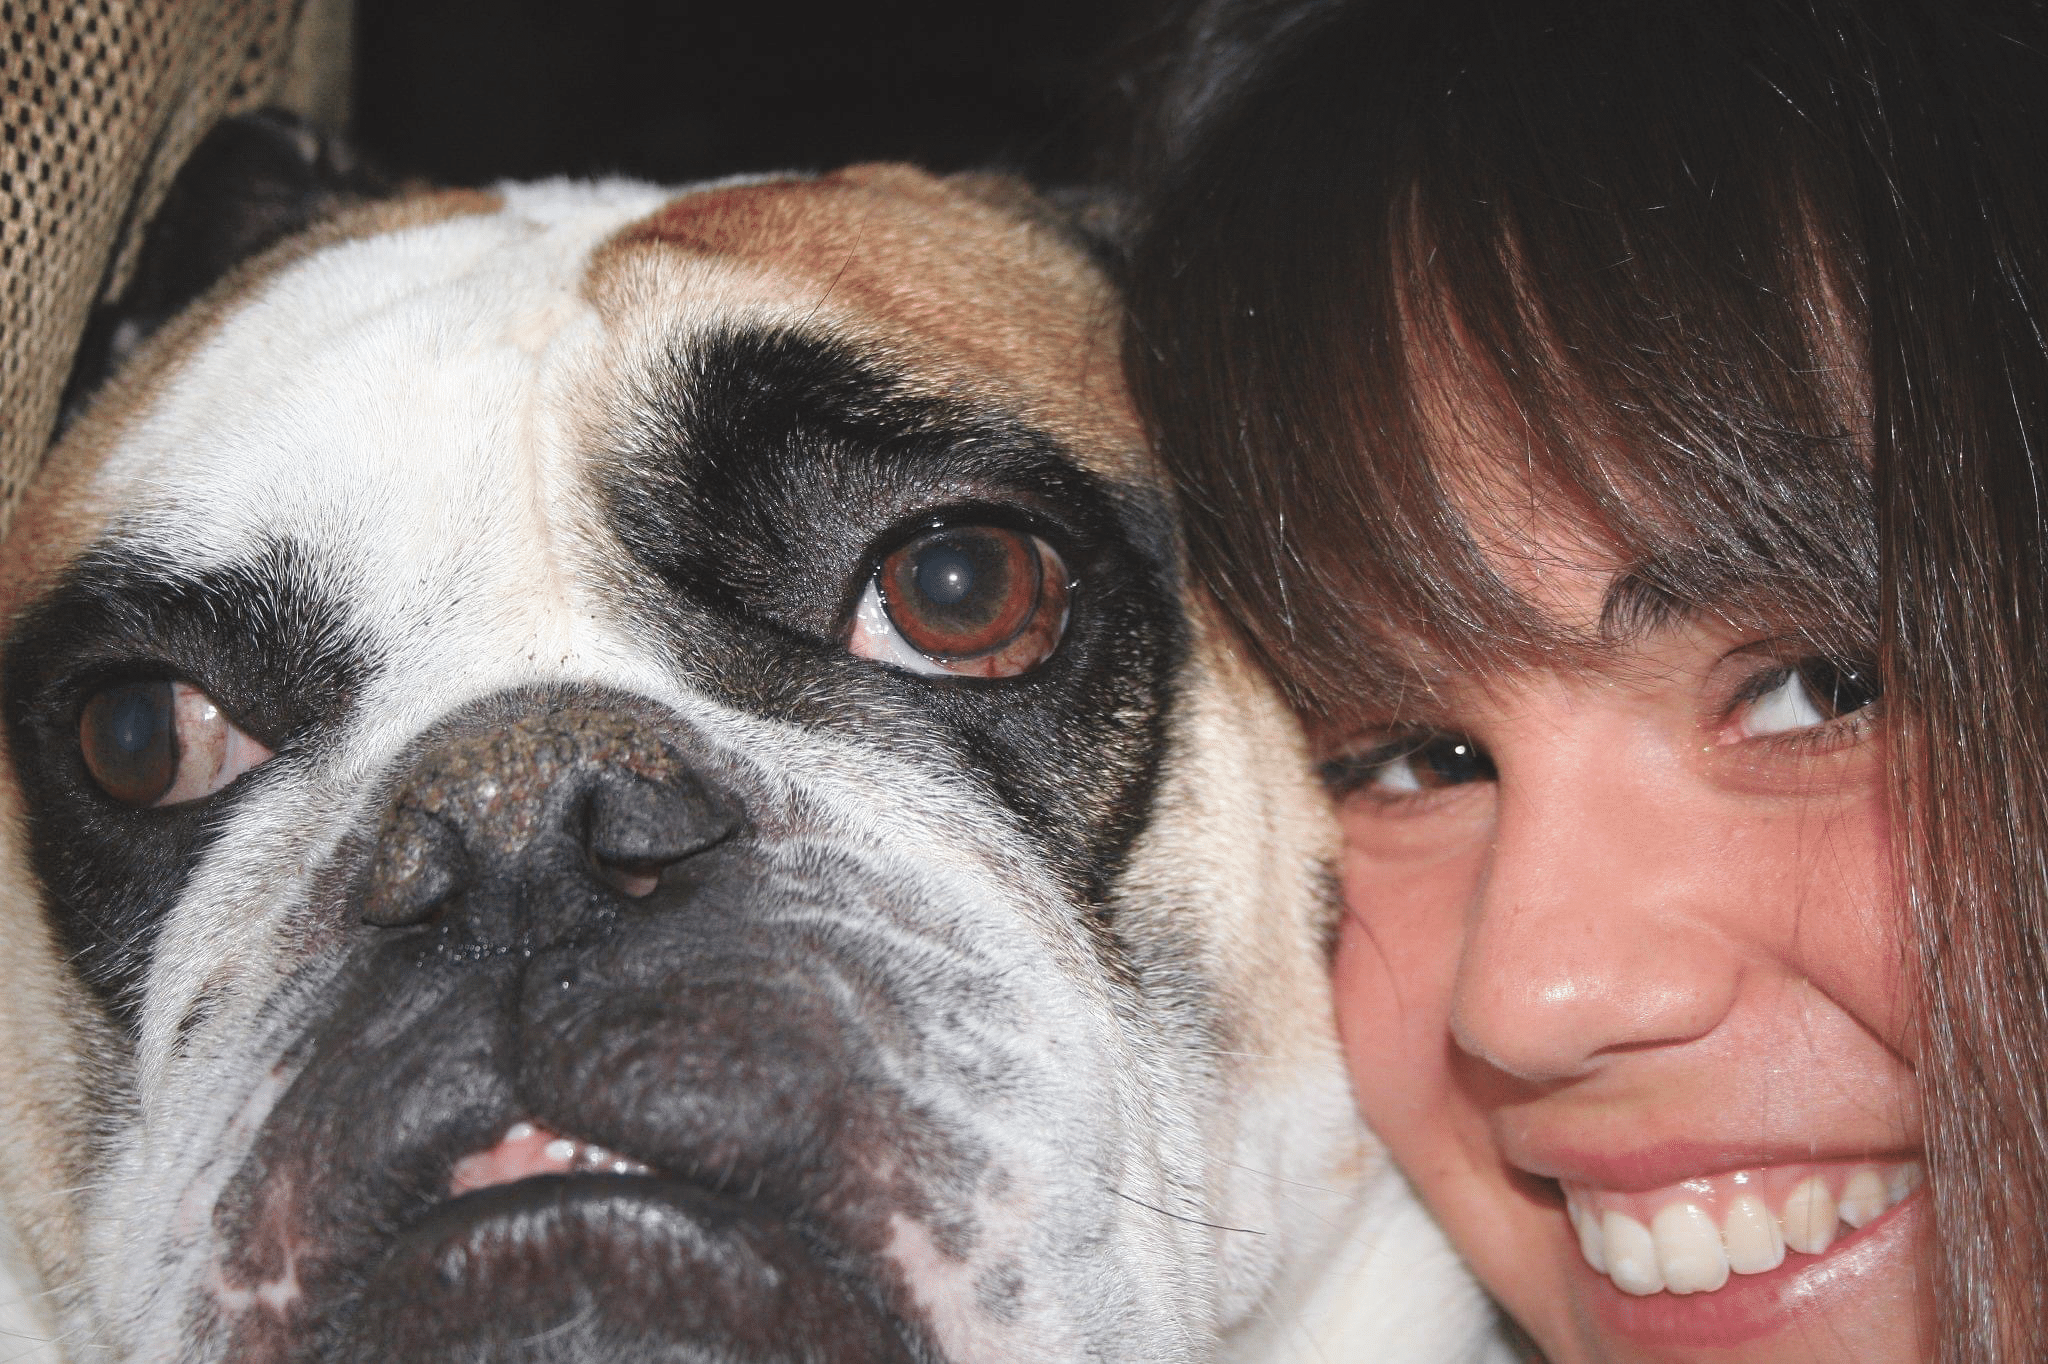 Picture of Rocco the Bulldog and one of his favorite people, his niece. He died suddenly in 2011 and we still miss him. He is an inspiration for our pet loss and grief work.